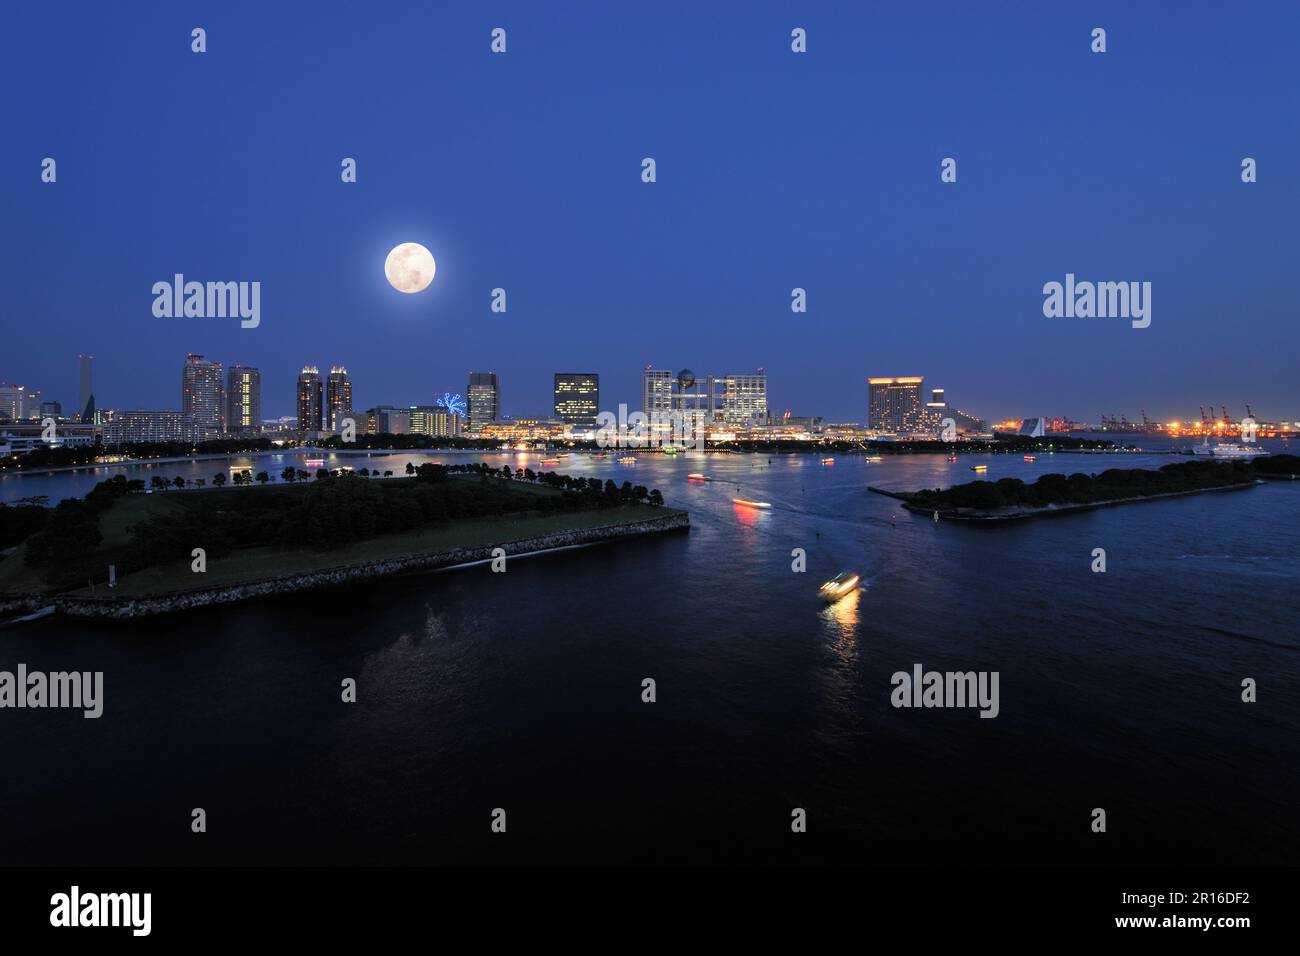 Odaiba Seaside Park and maritime subcity center buildings with the full moon Stock Photo